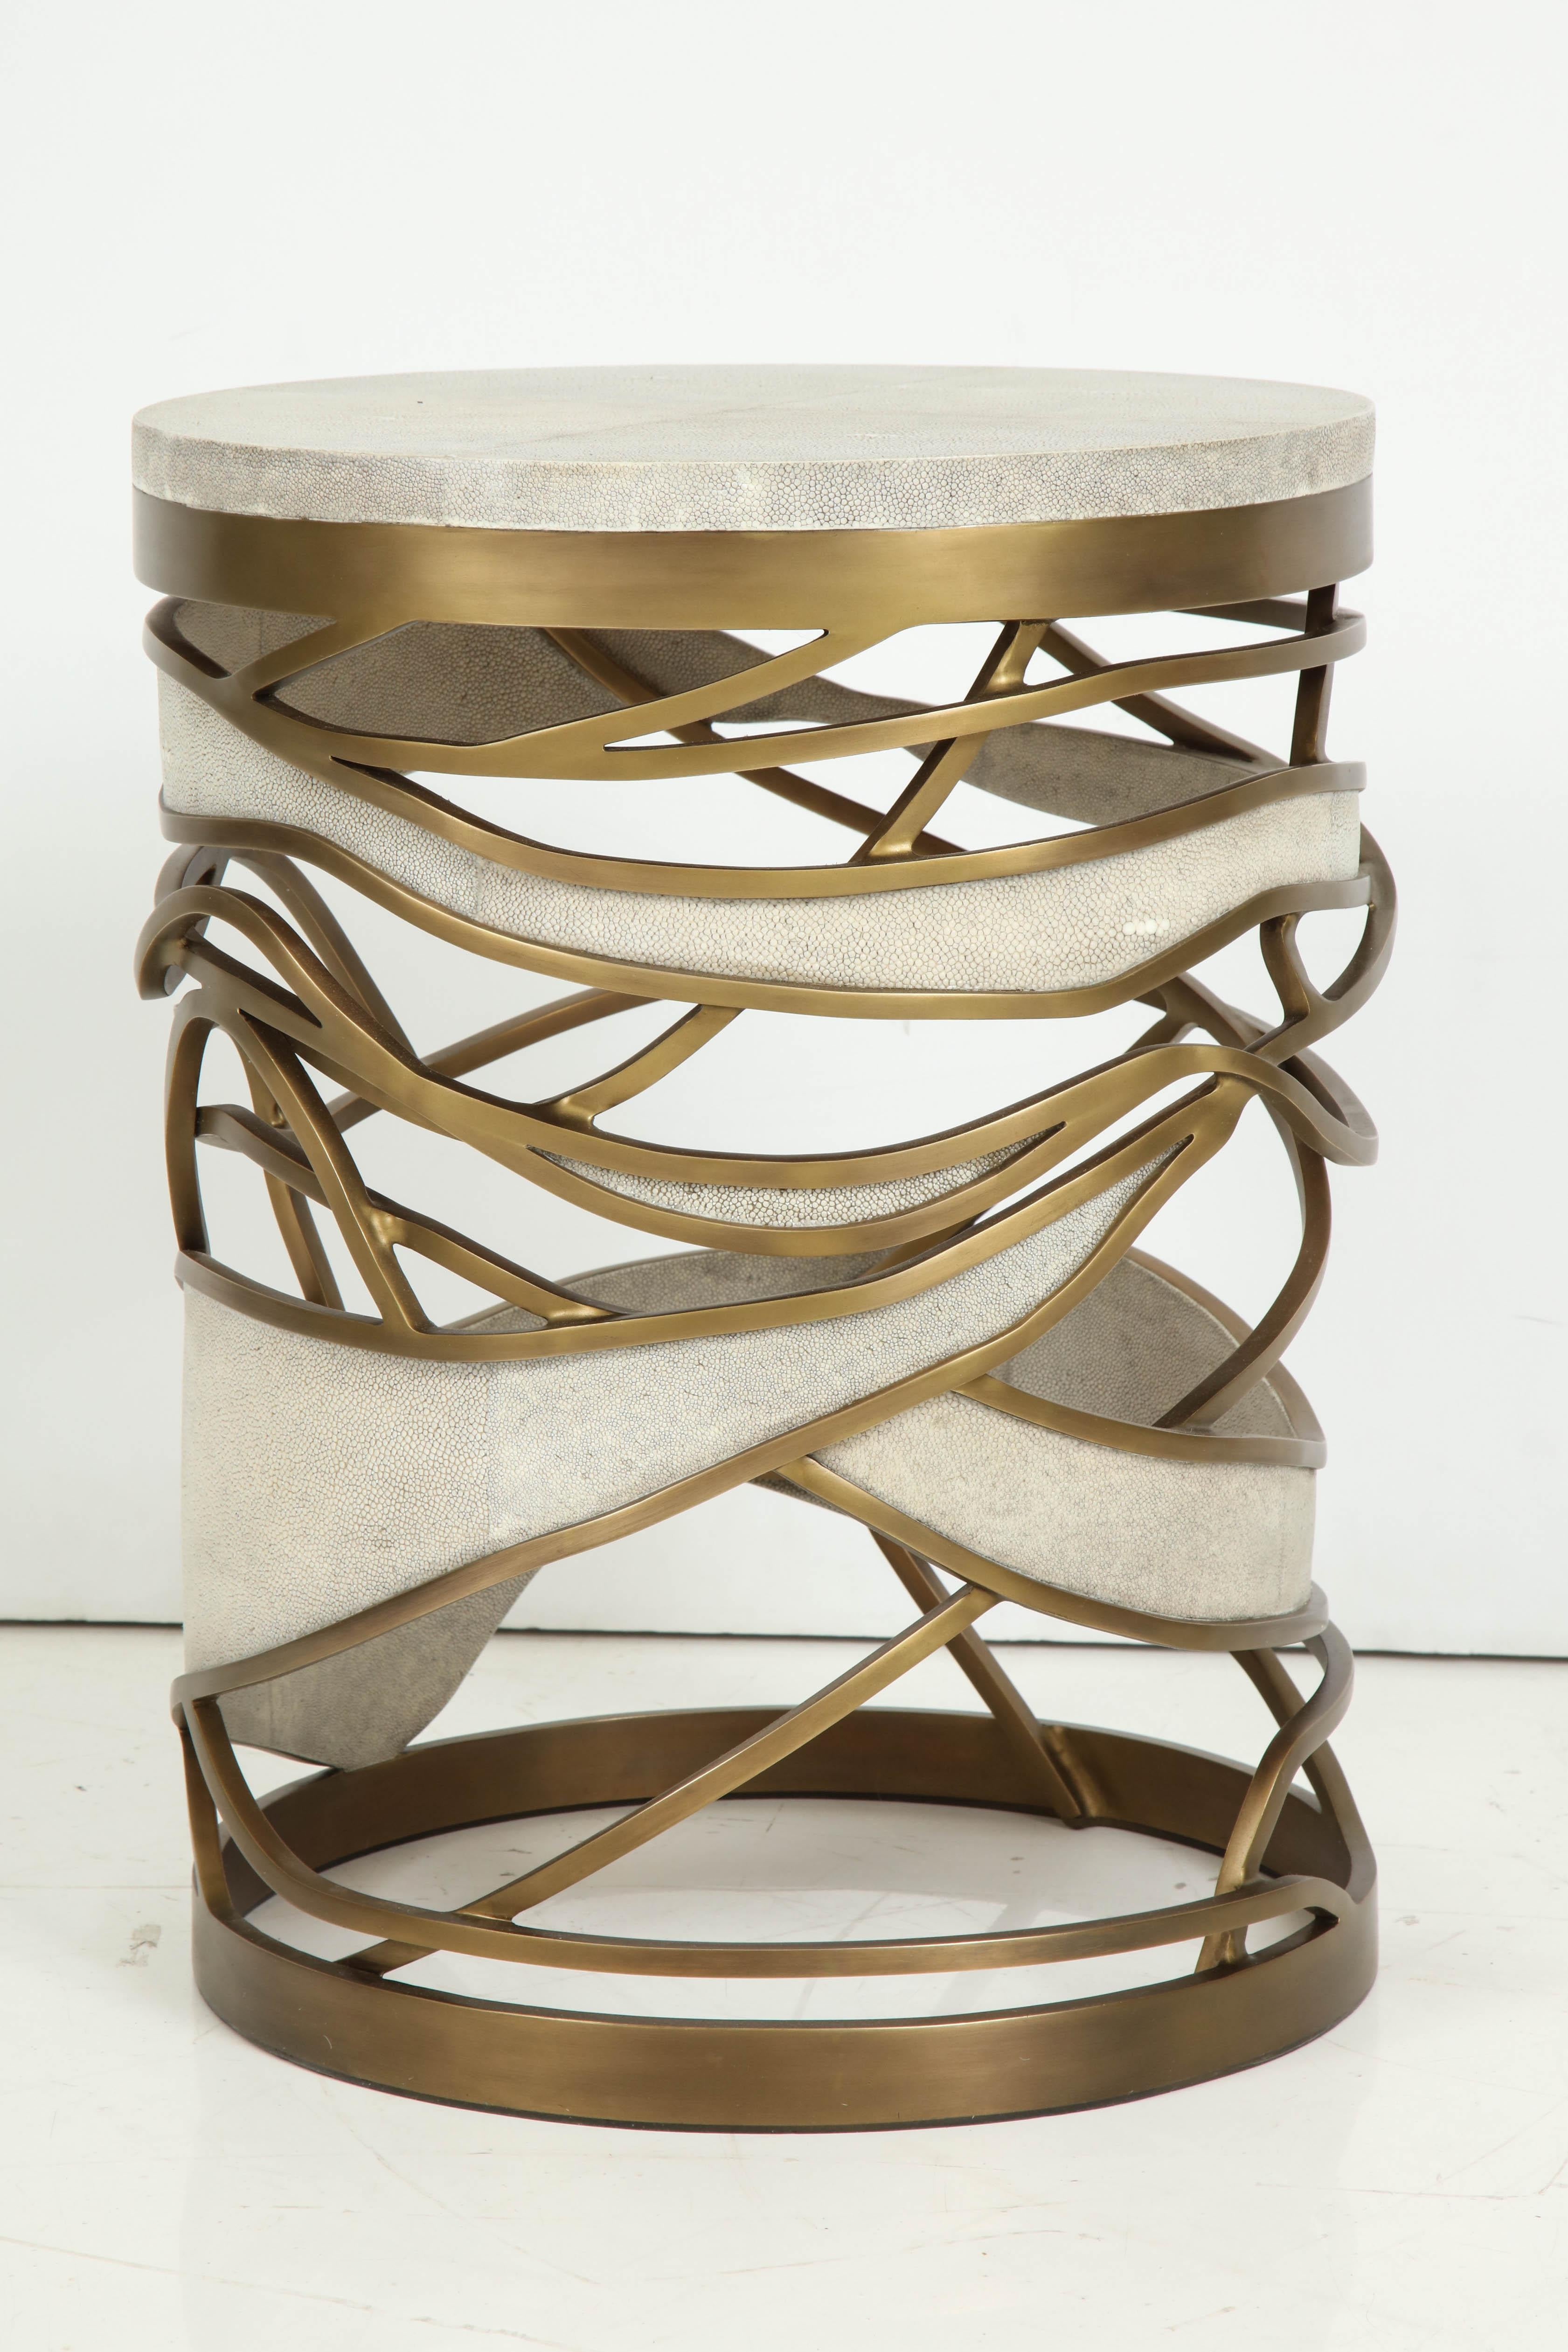 Shagreen Stool or Side Table with Brass Details, Contemporary, Cream Shagreen 4